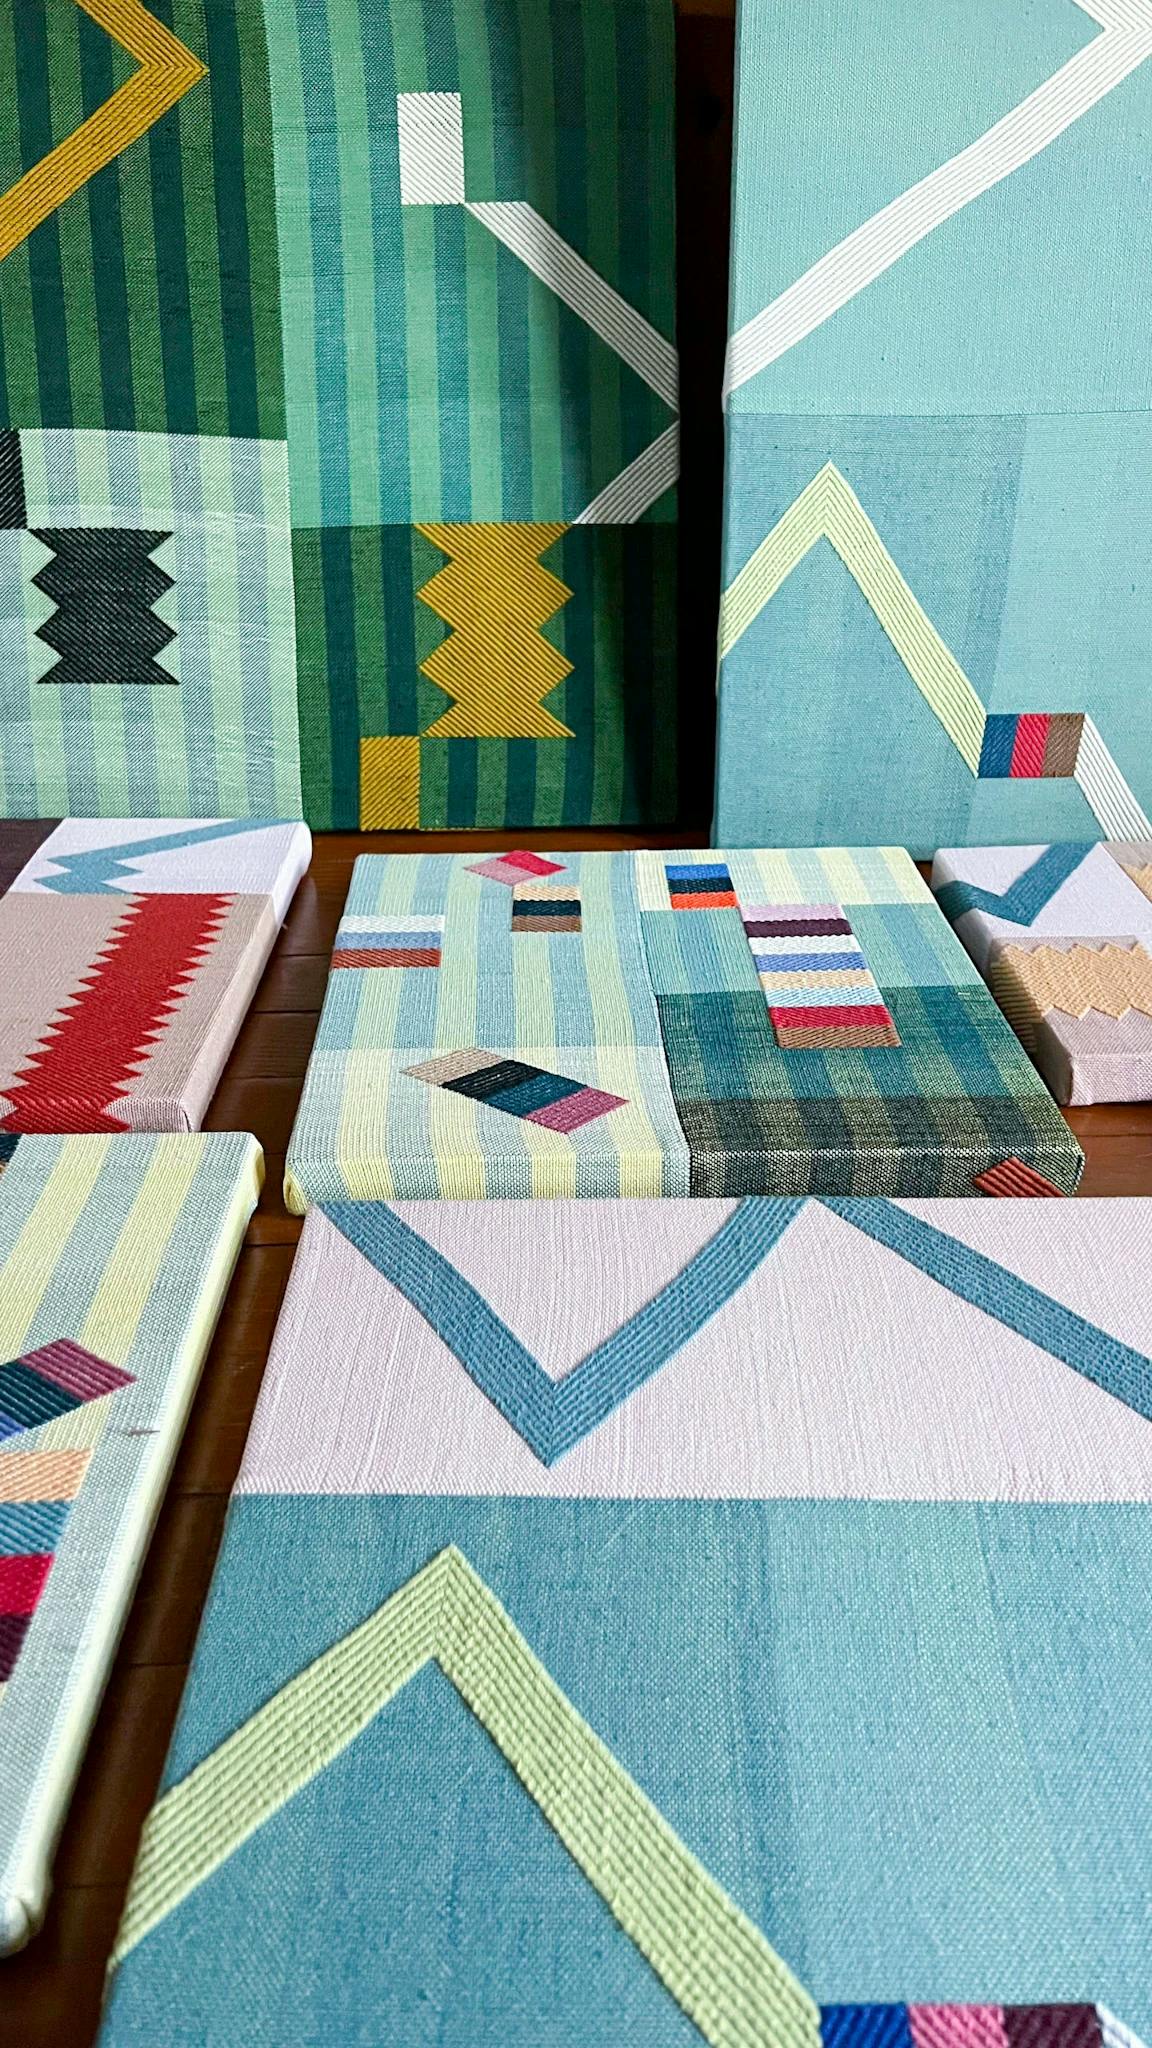 Colorful woven and painted pieces, in various sizes, by artist Sarah Sullivan Sherrod laid out in her studio.